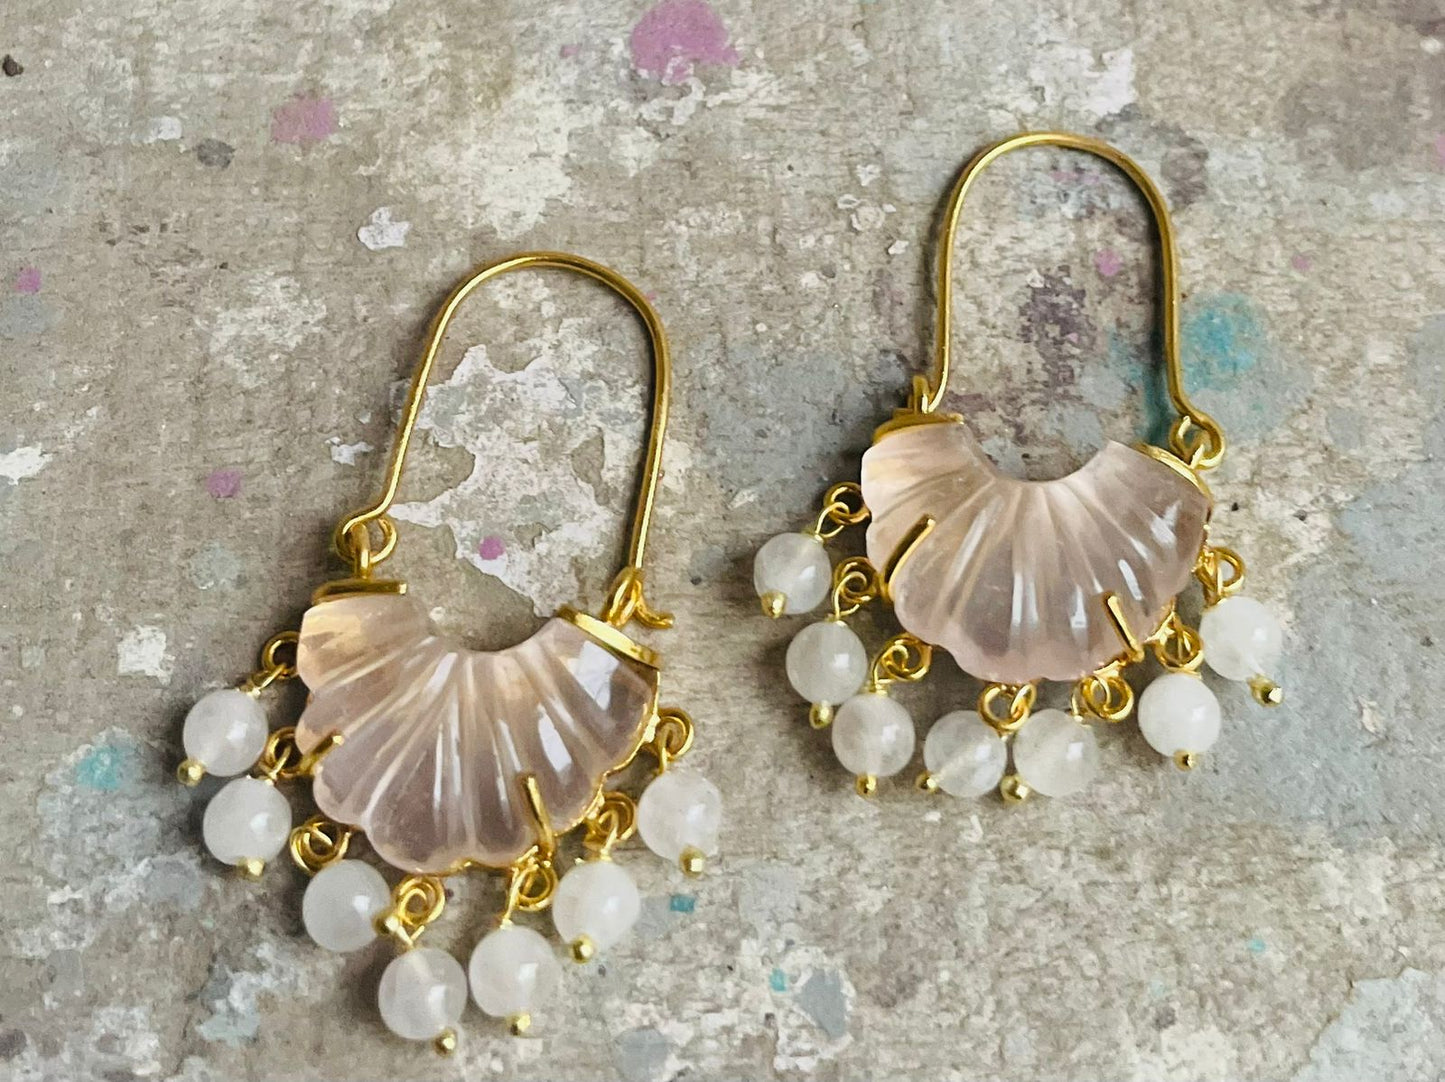 Rose quartz carved stone hoops with rose quartz drops. 
Sterling silver with 1 micron gold plating.